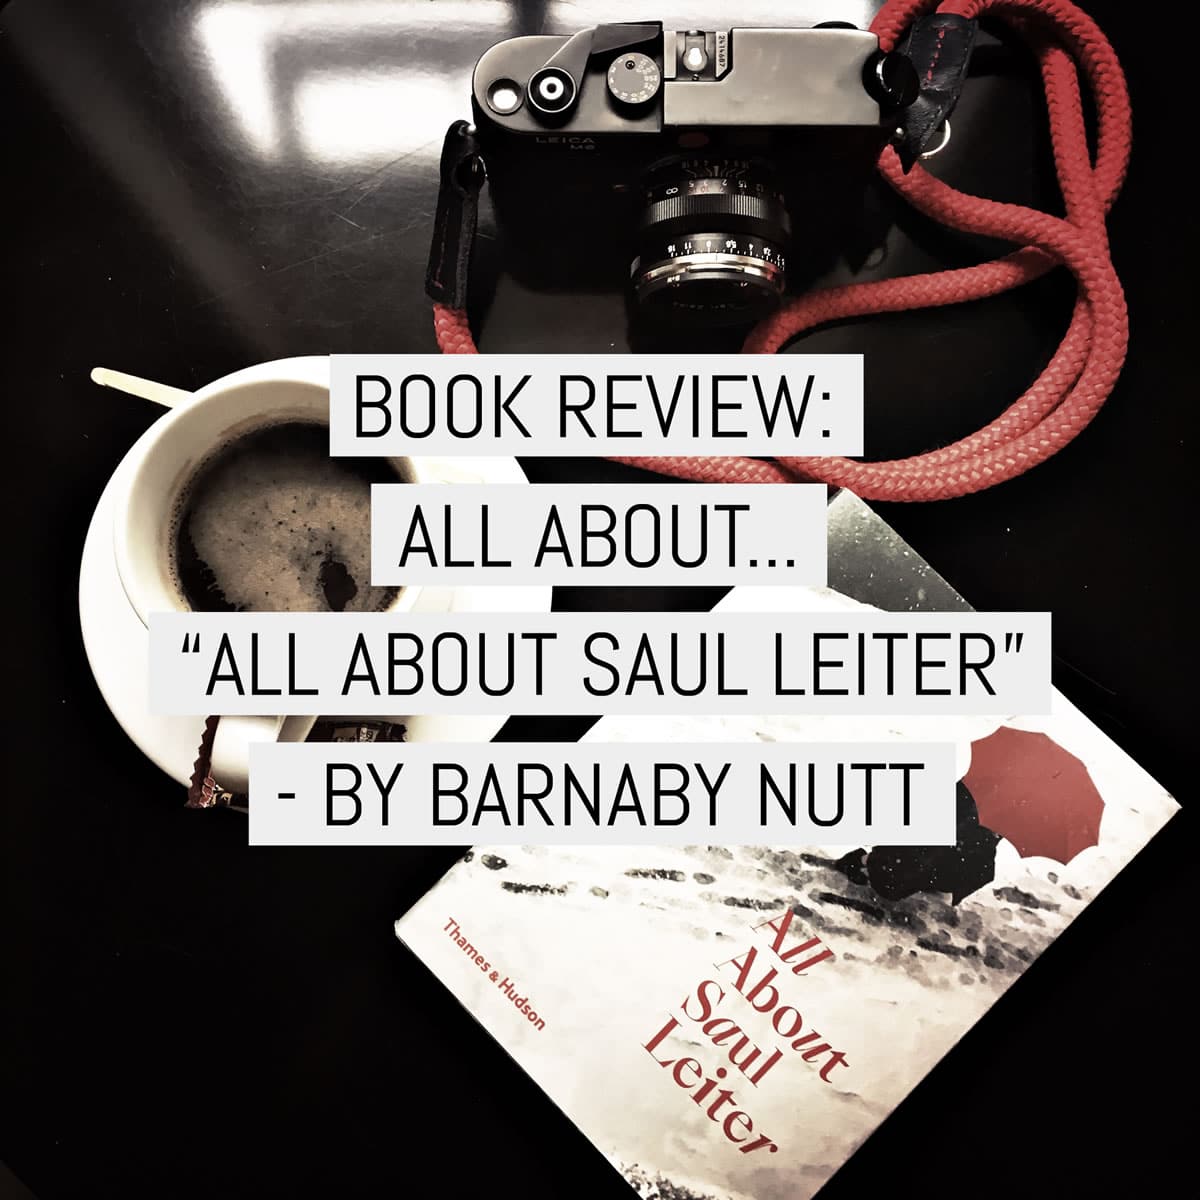 Book review: All about “All About Saul Leiter”